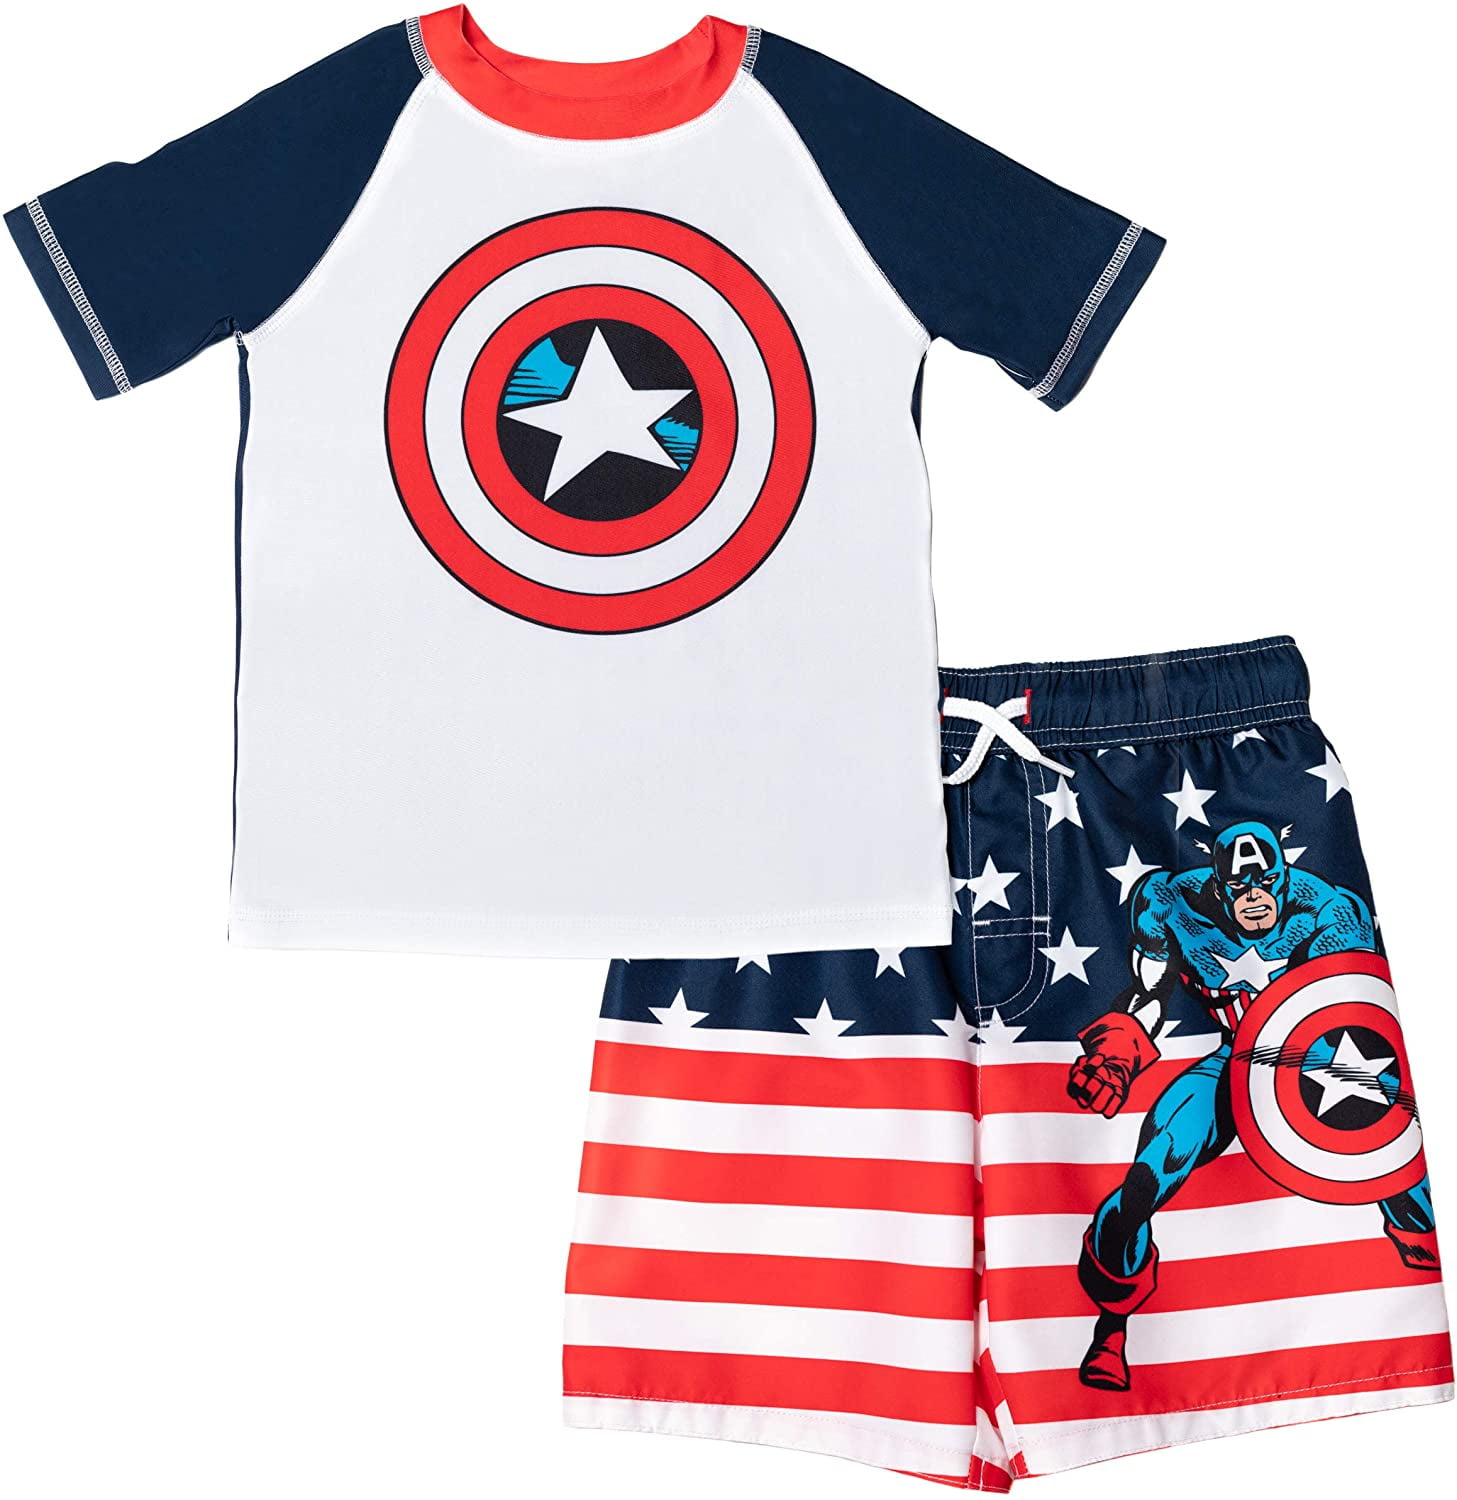 Childrens/Kids Captain America Swimming Costume Surf Suit Boys Swimwear Age 18 Months-5 Years